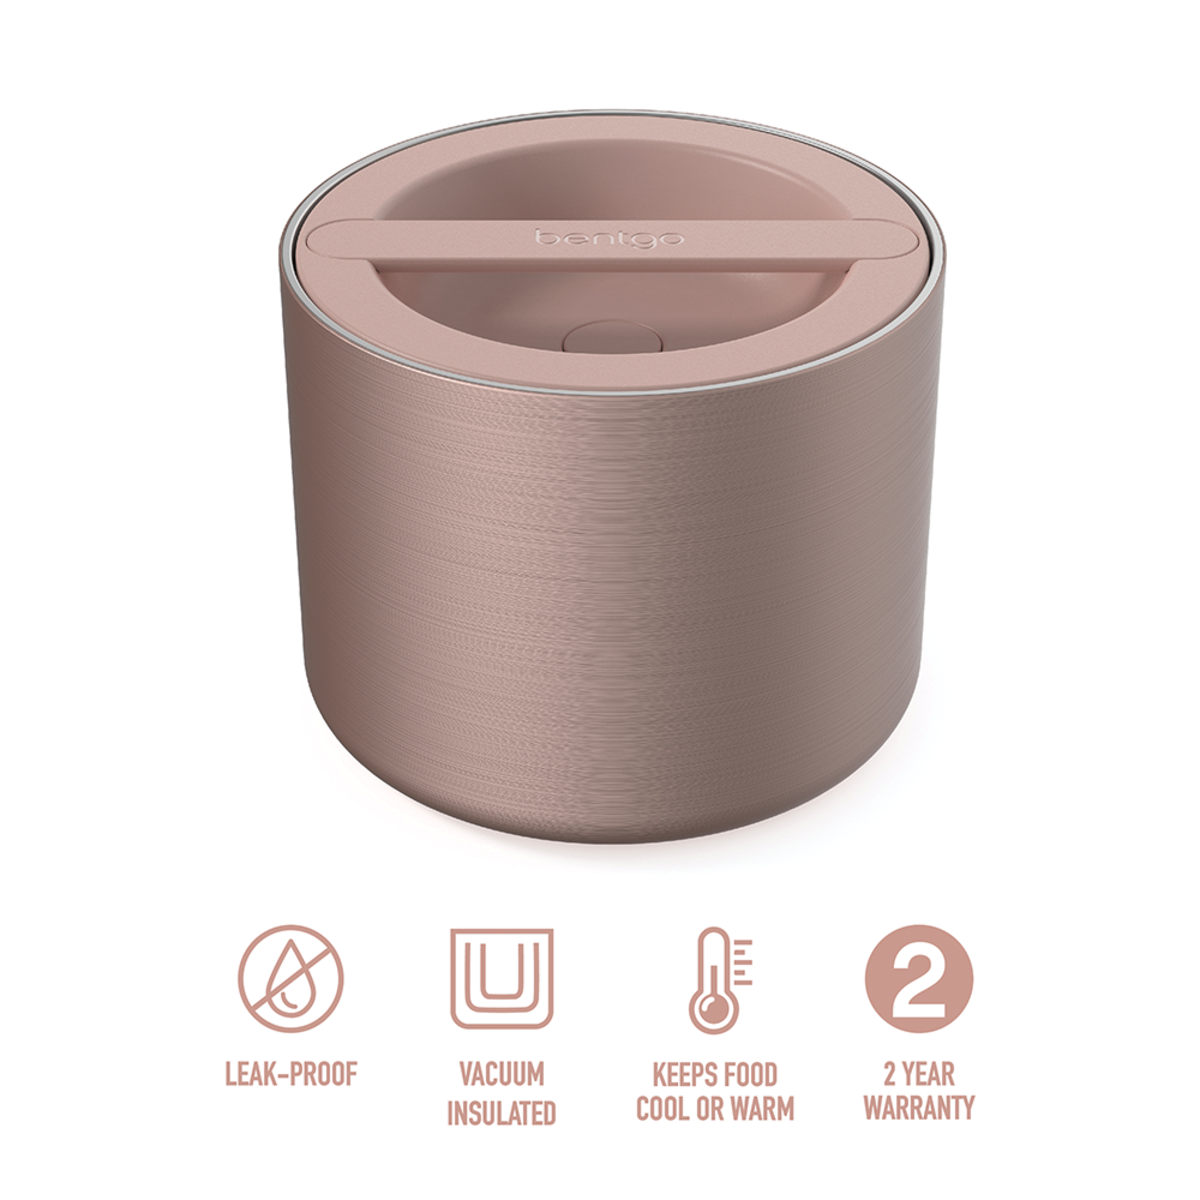 BENTGO STAINLESS STEEL INSULATED FOOD CONTAINER 560ML -Rose Gold